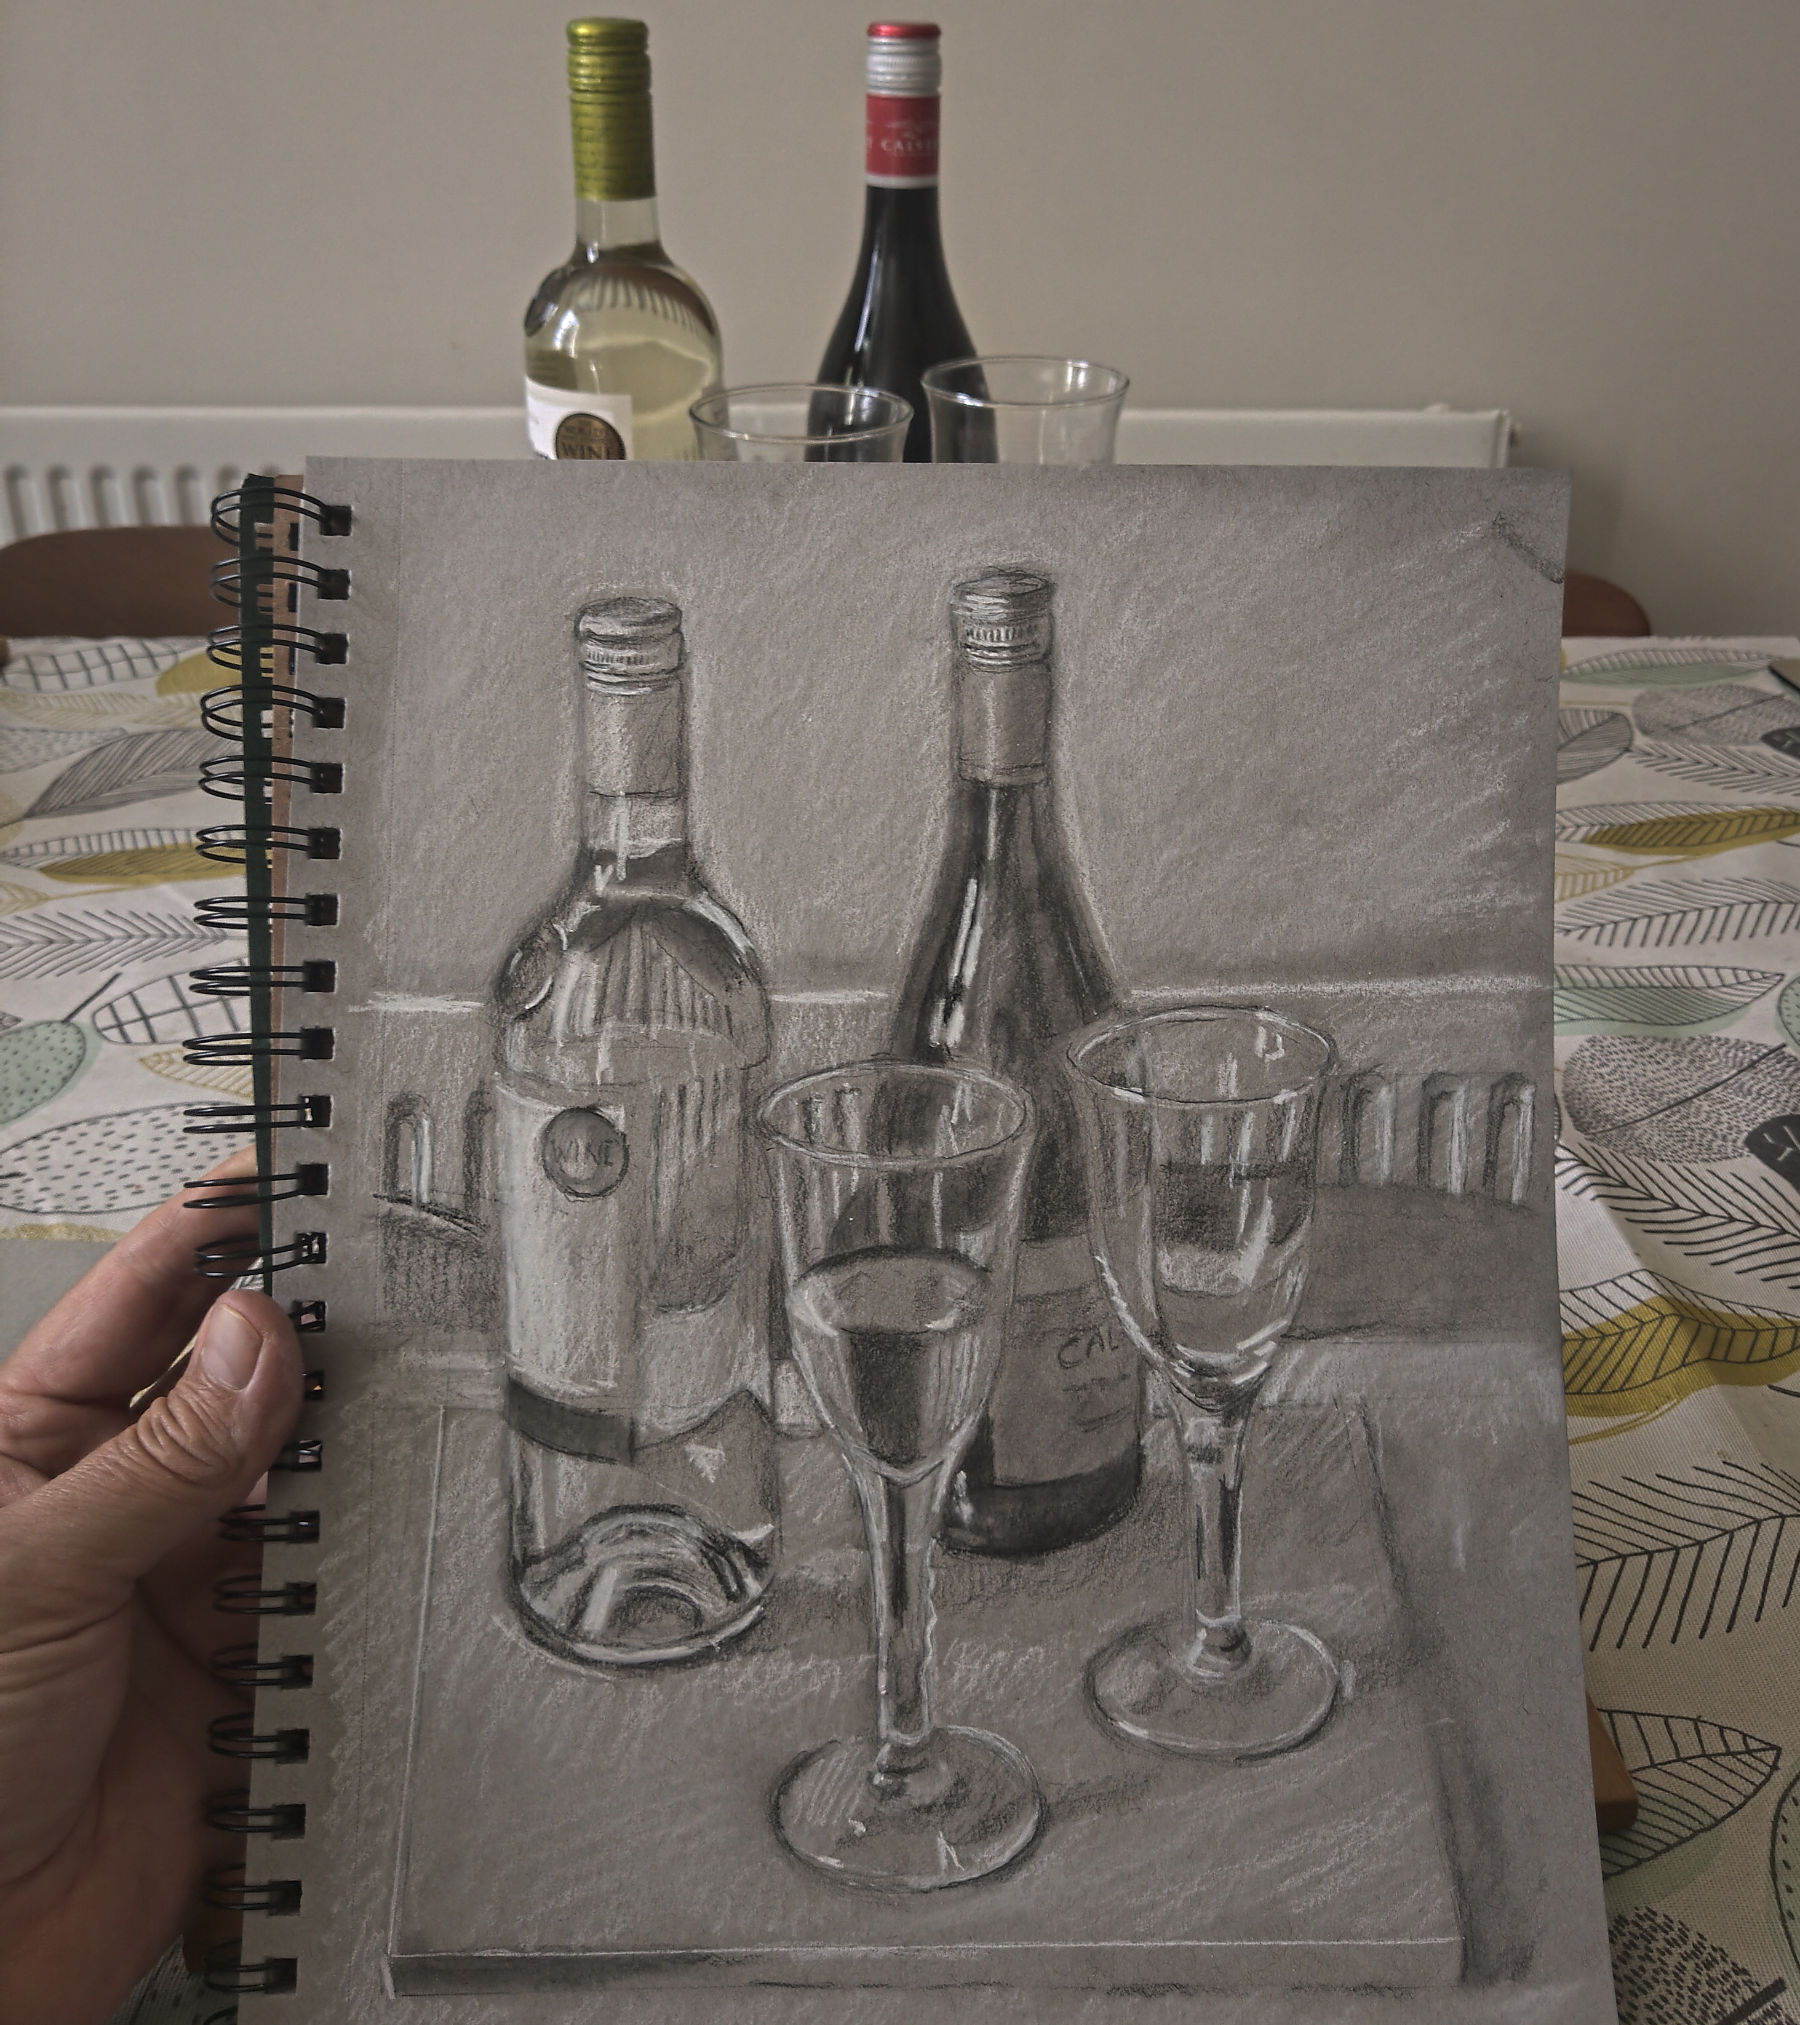 drawing of glasses and wine bottles